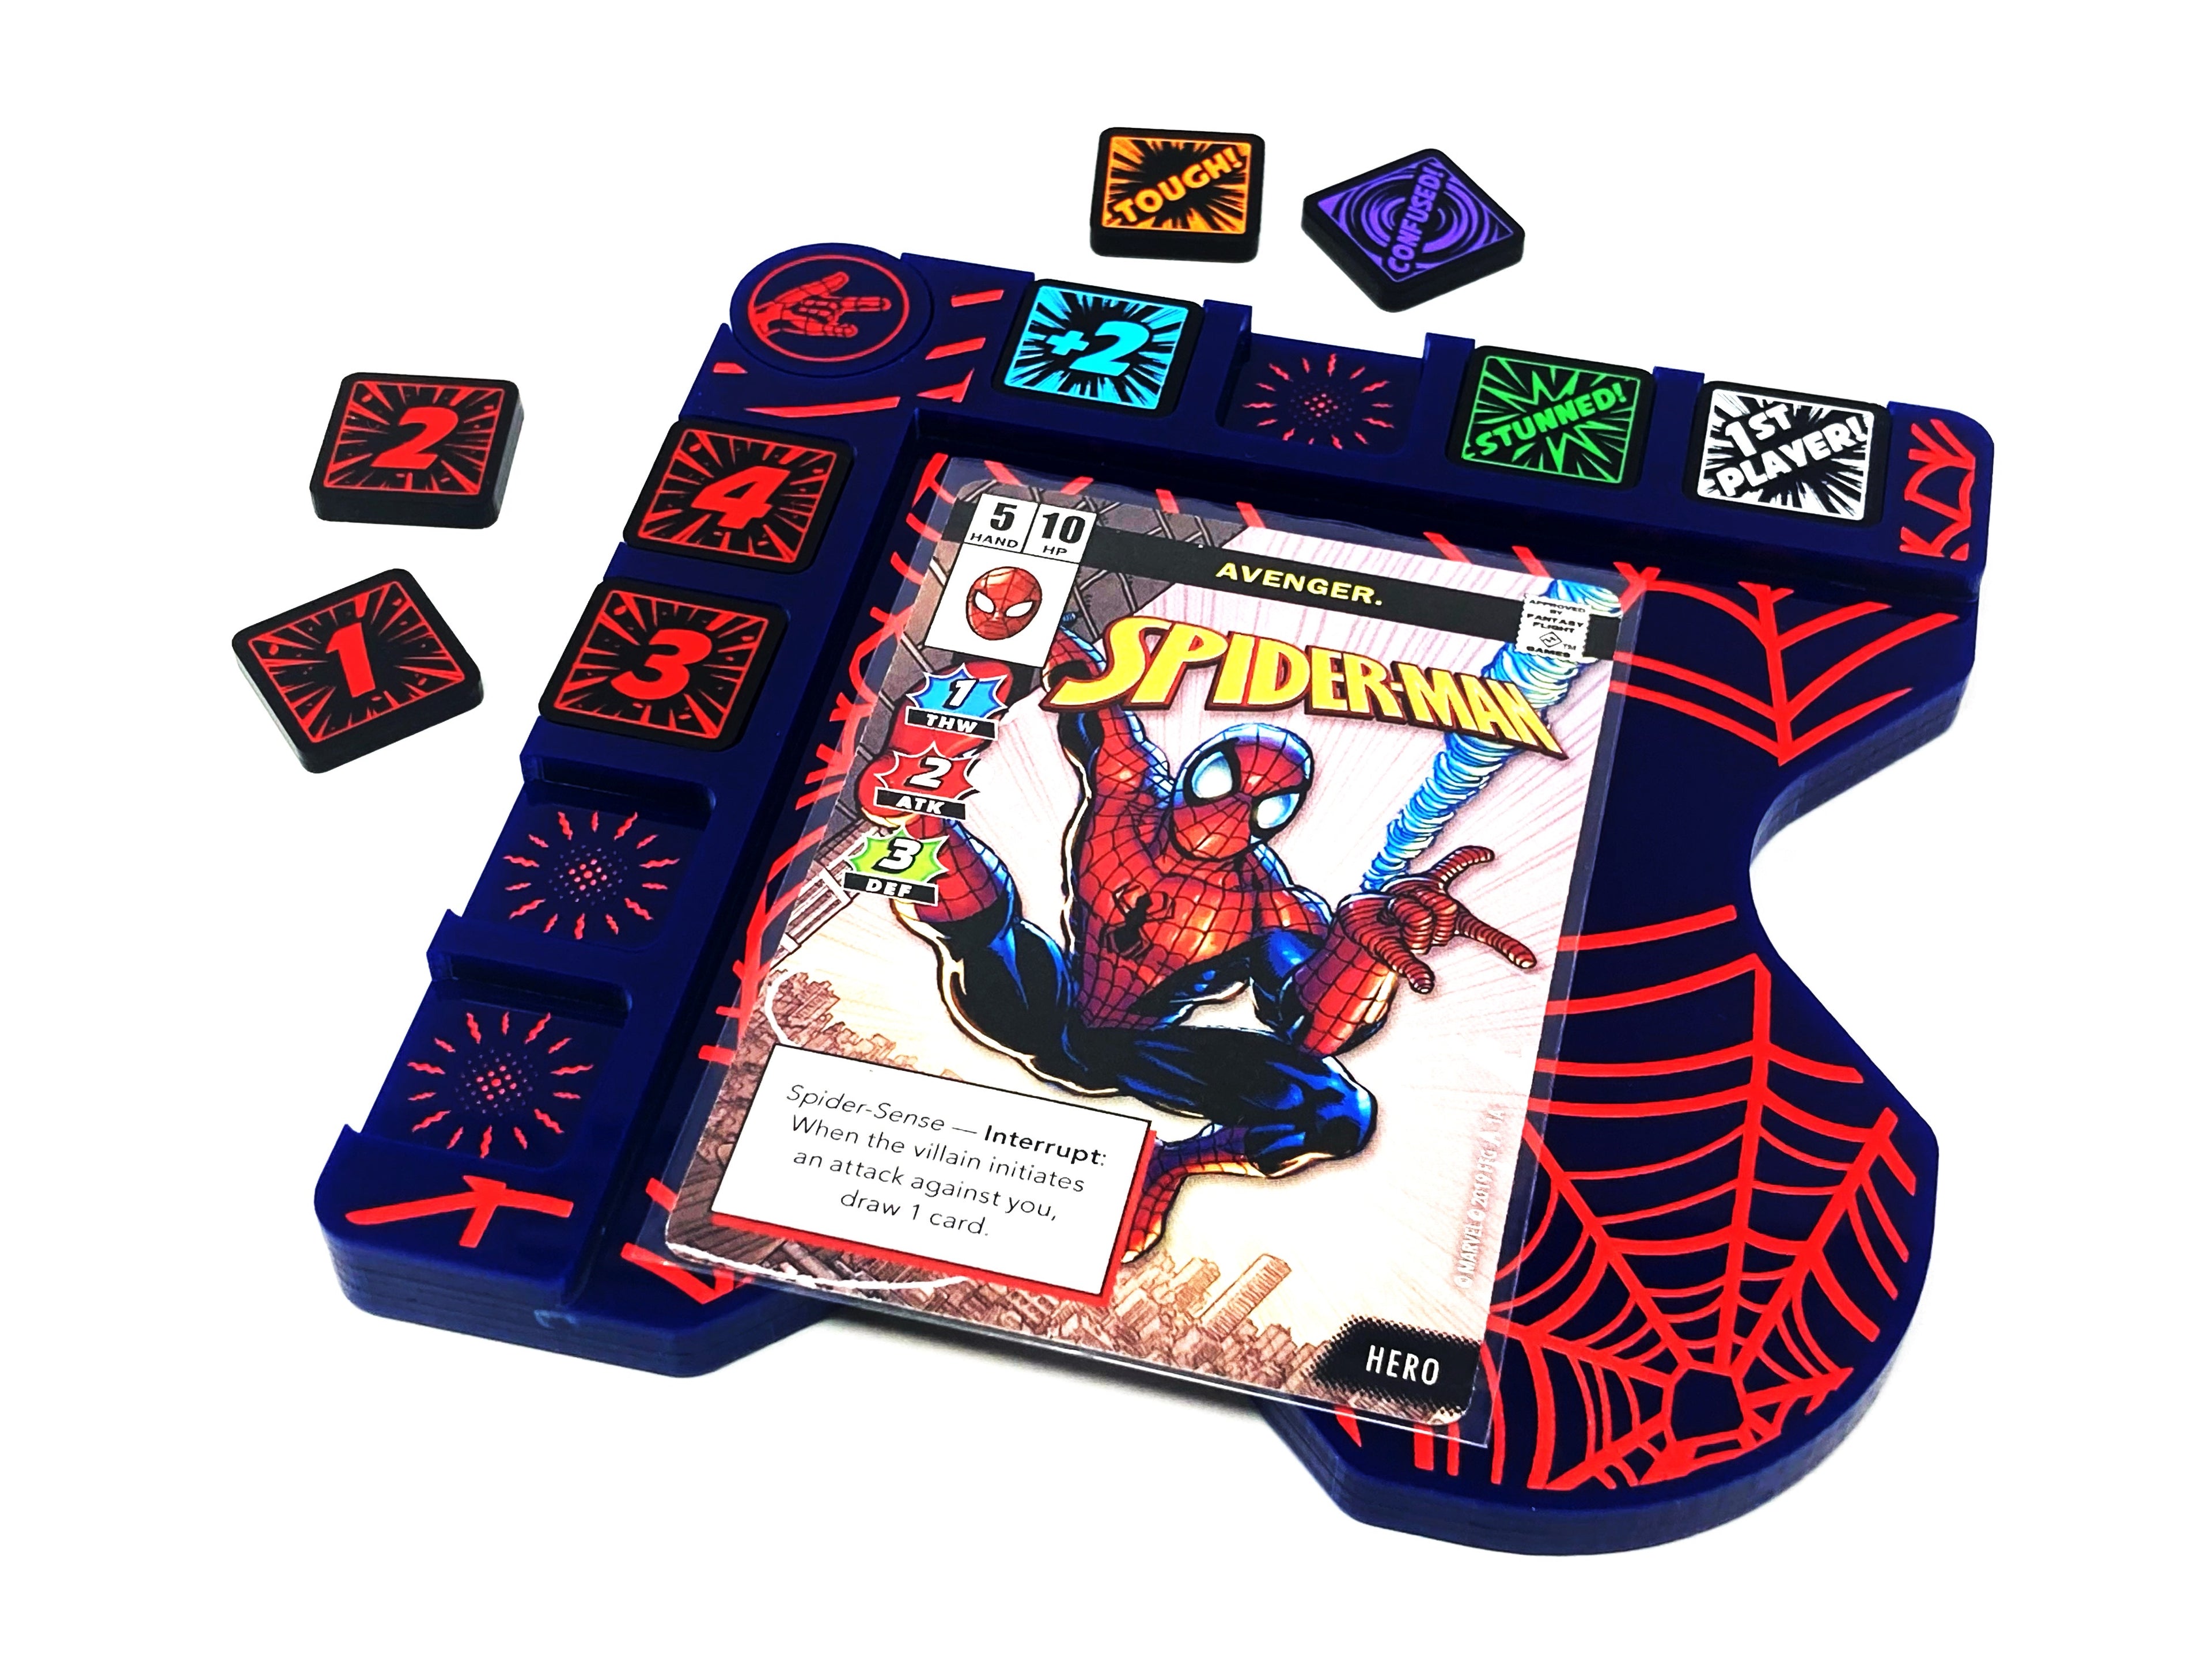 Spider-Man Themed Hero board for Marvel Champions LCG compatible, (Tokens NOT Included)